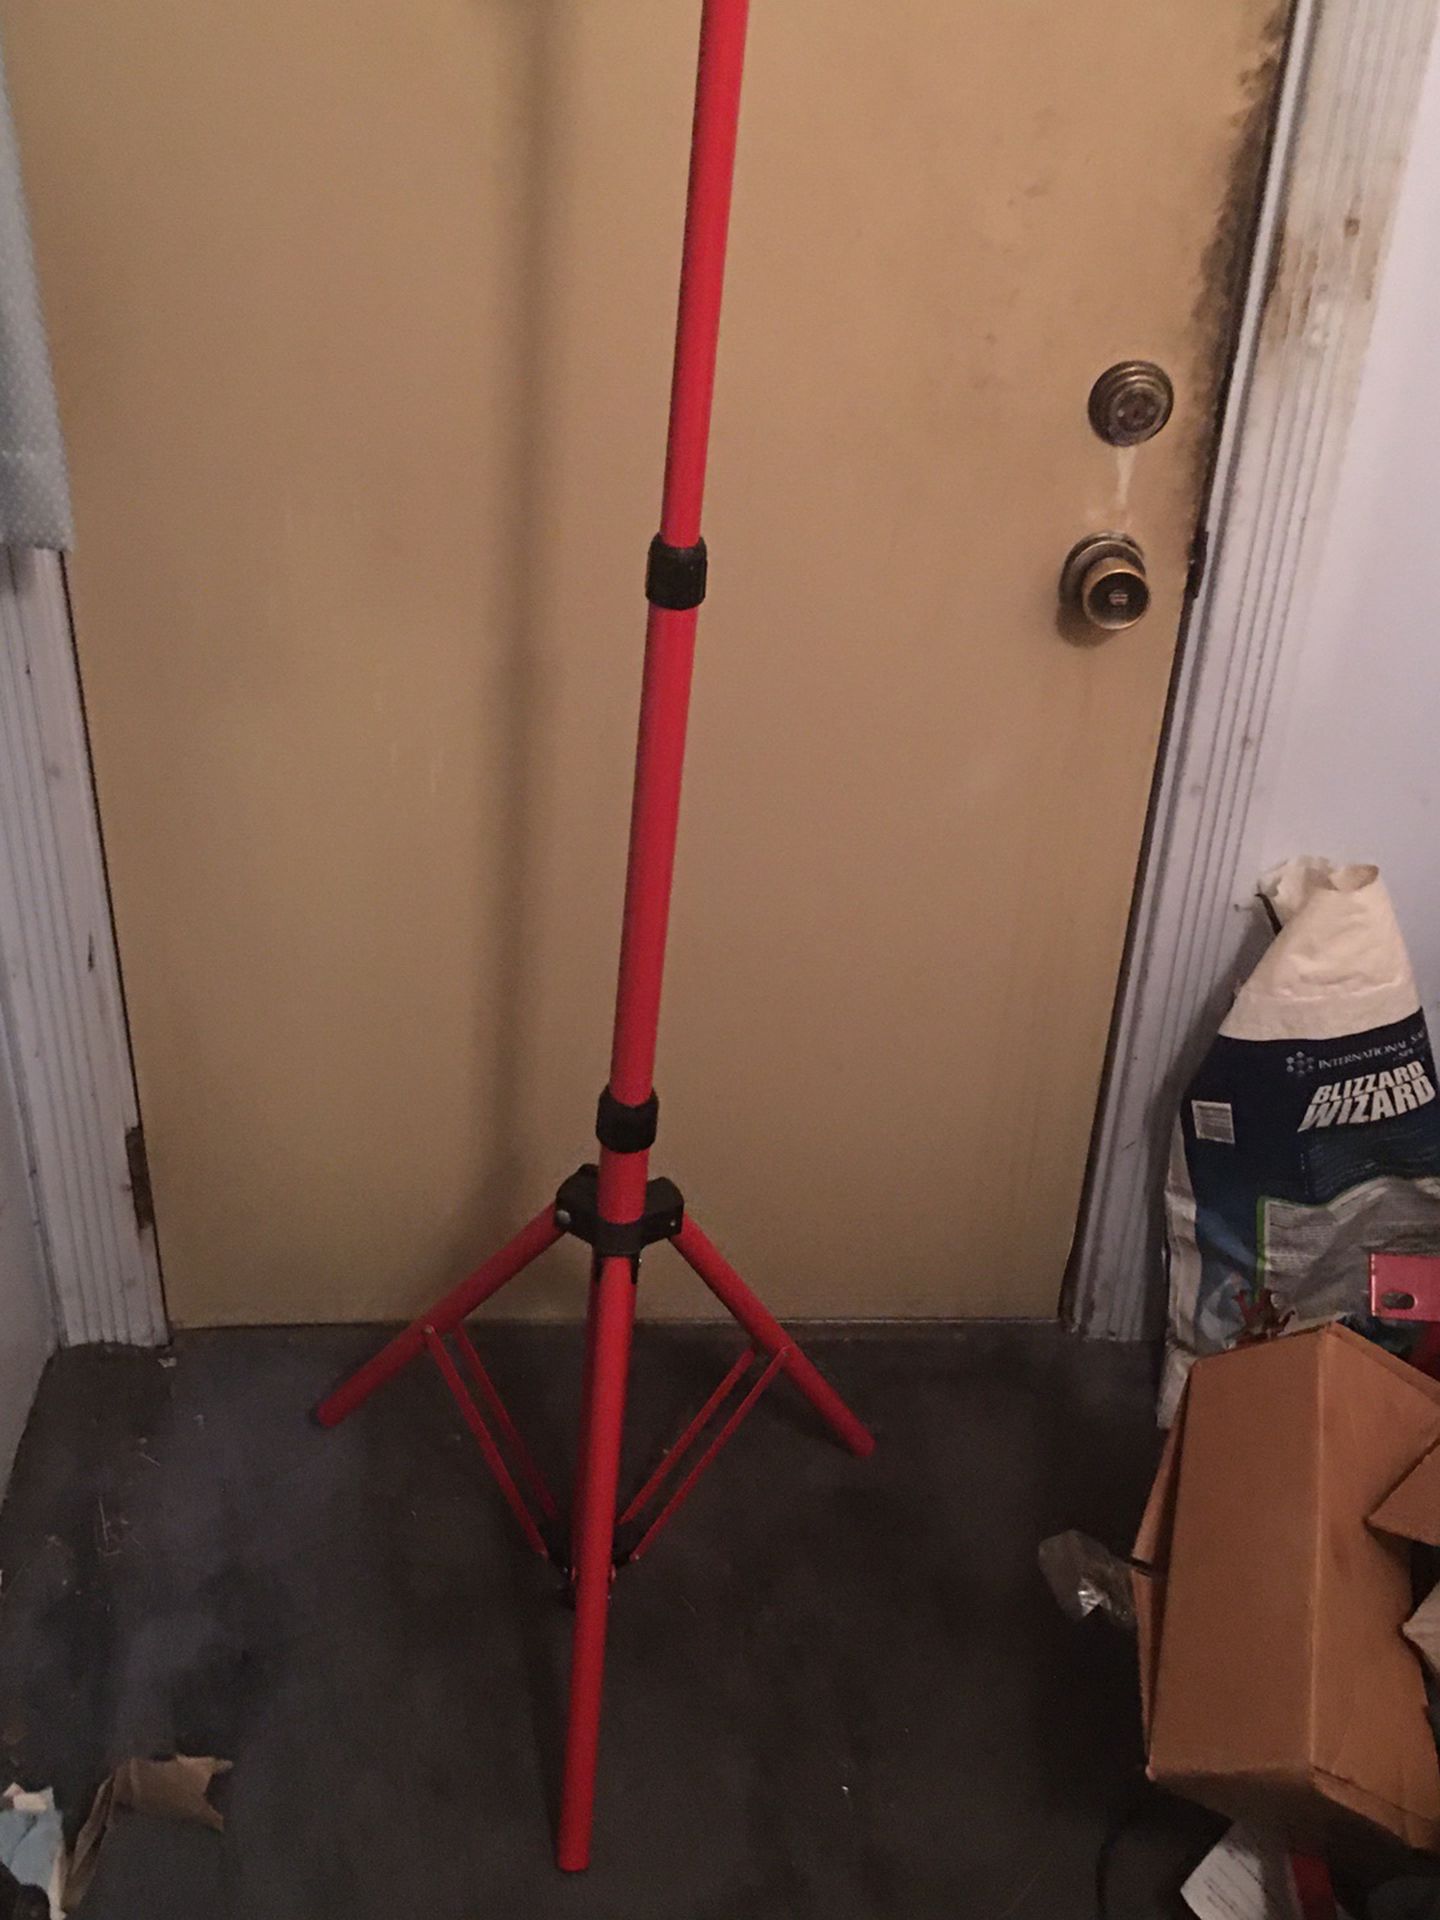 BRAND NEW NEVER USED 60” INCH ADJUSTABLE TRIPOD $20.00